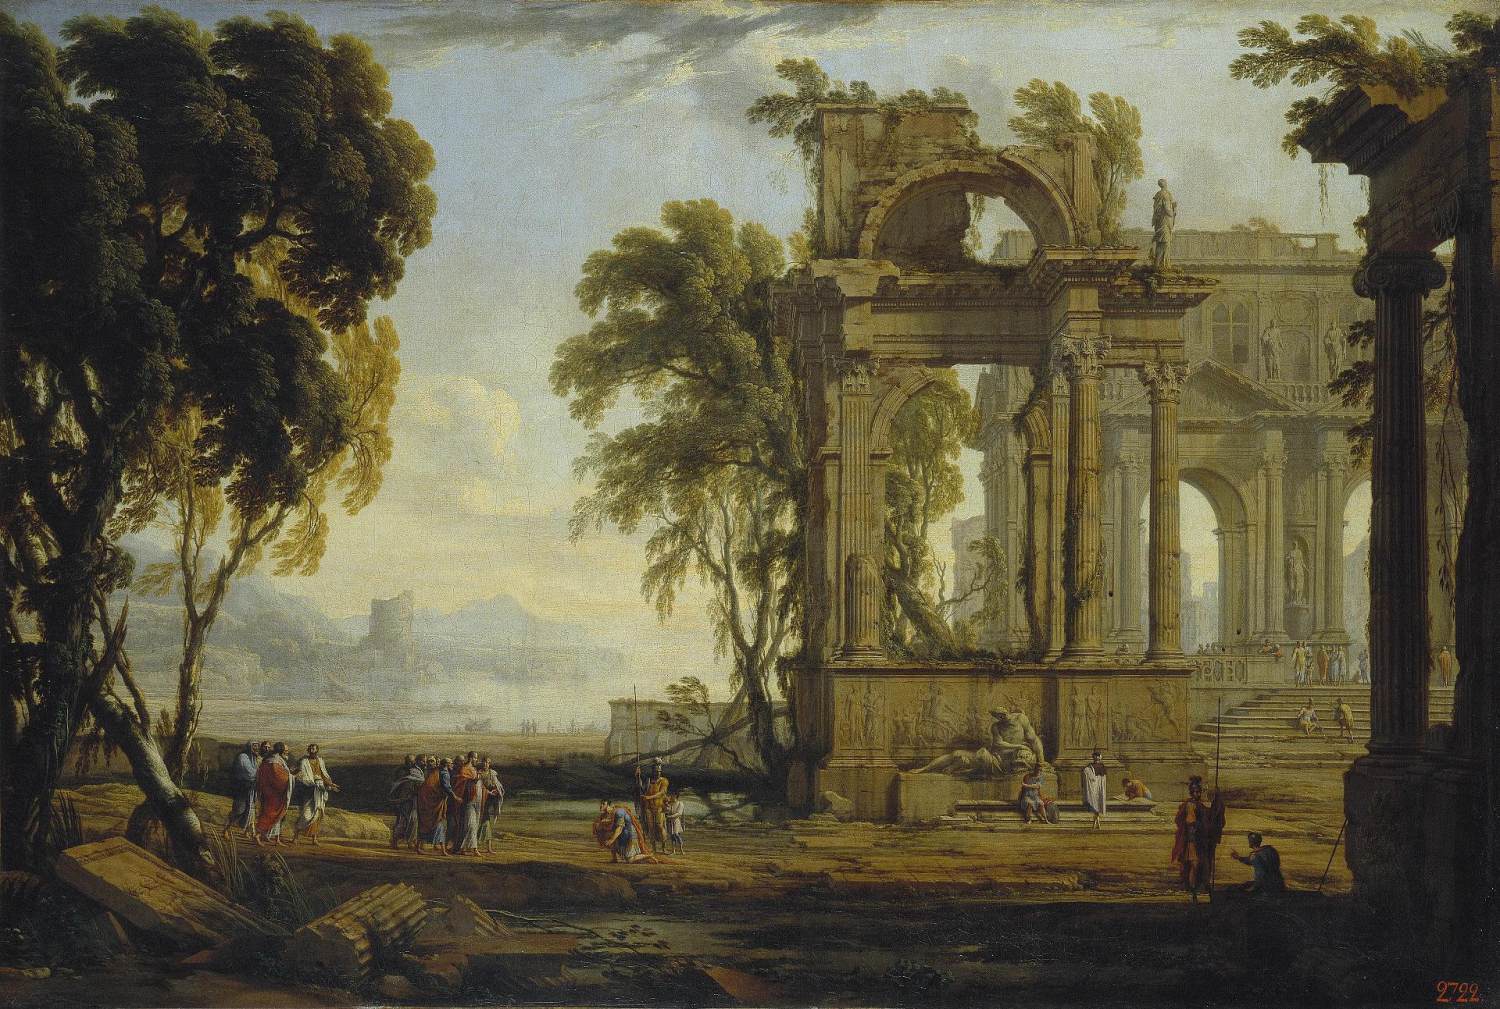 Landscape with Christ and a Centurion